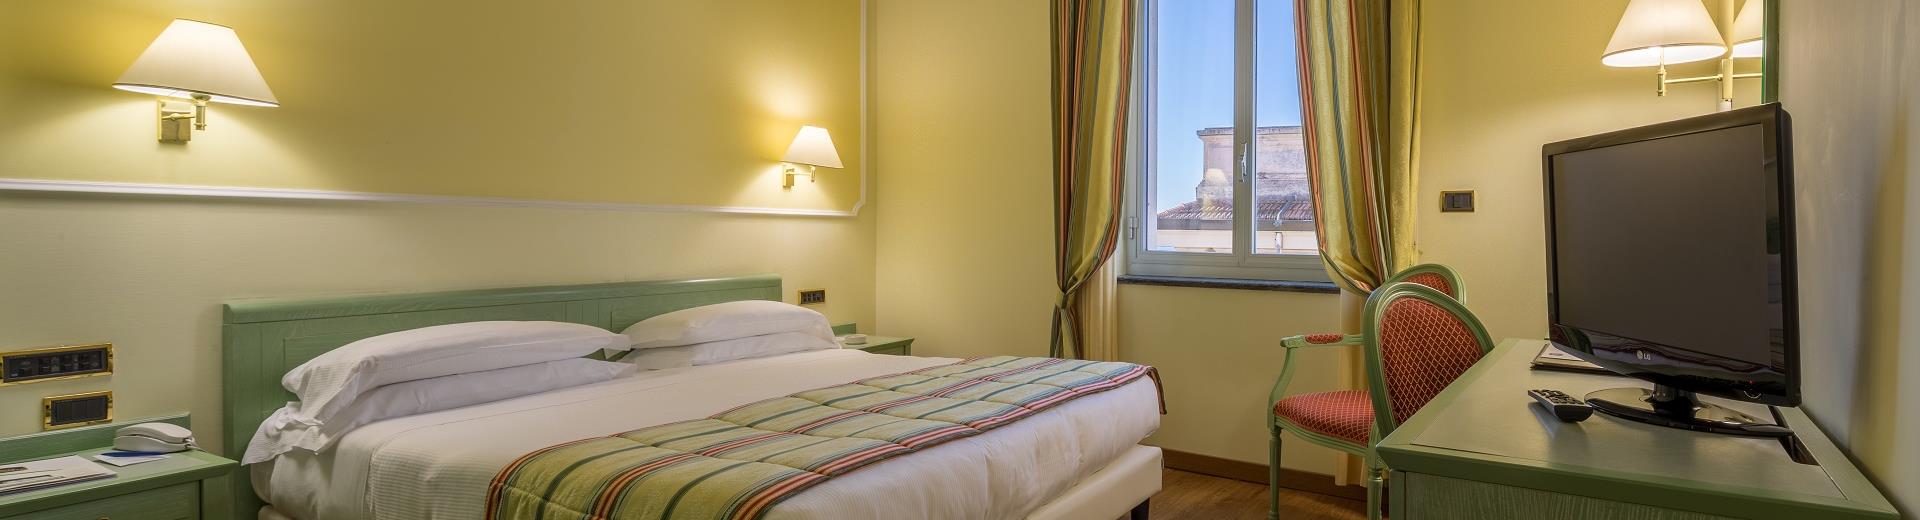 Comfortable and classy our classic room in the center of Sanremo